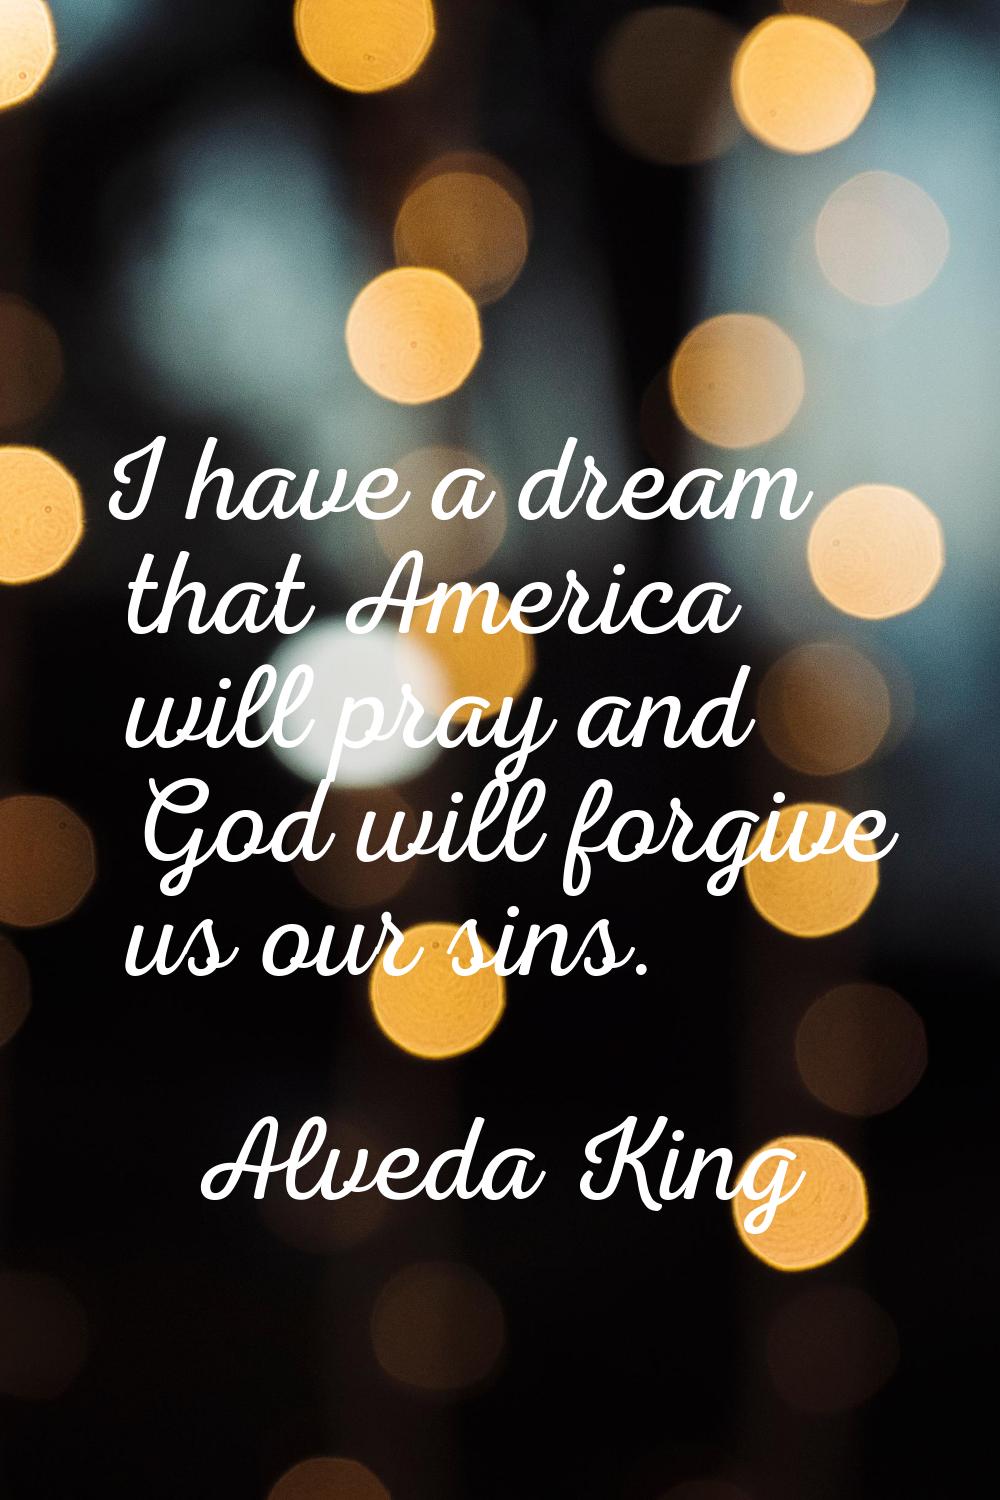 I have a dream that America will pray and God will forgive us our sins.